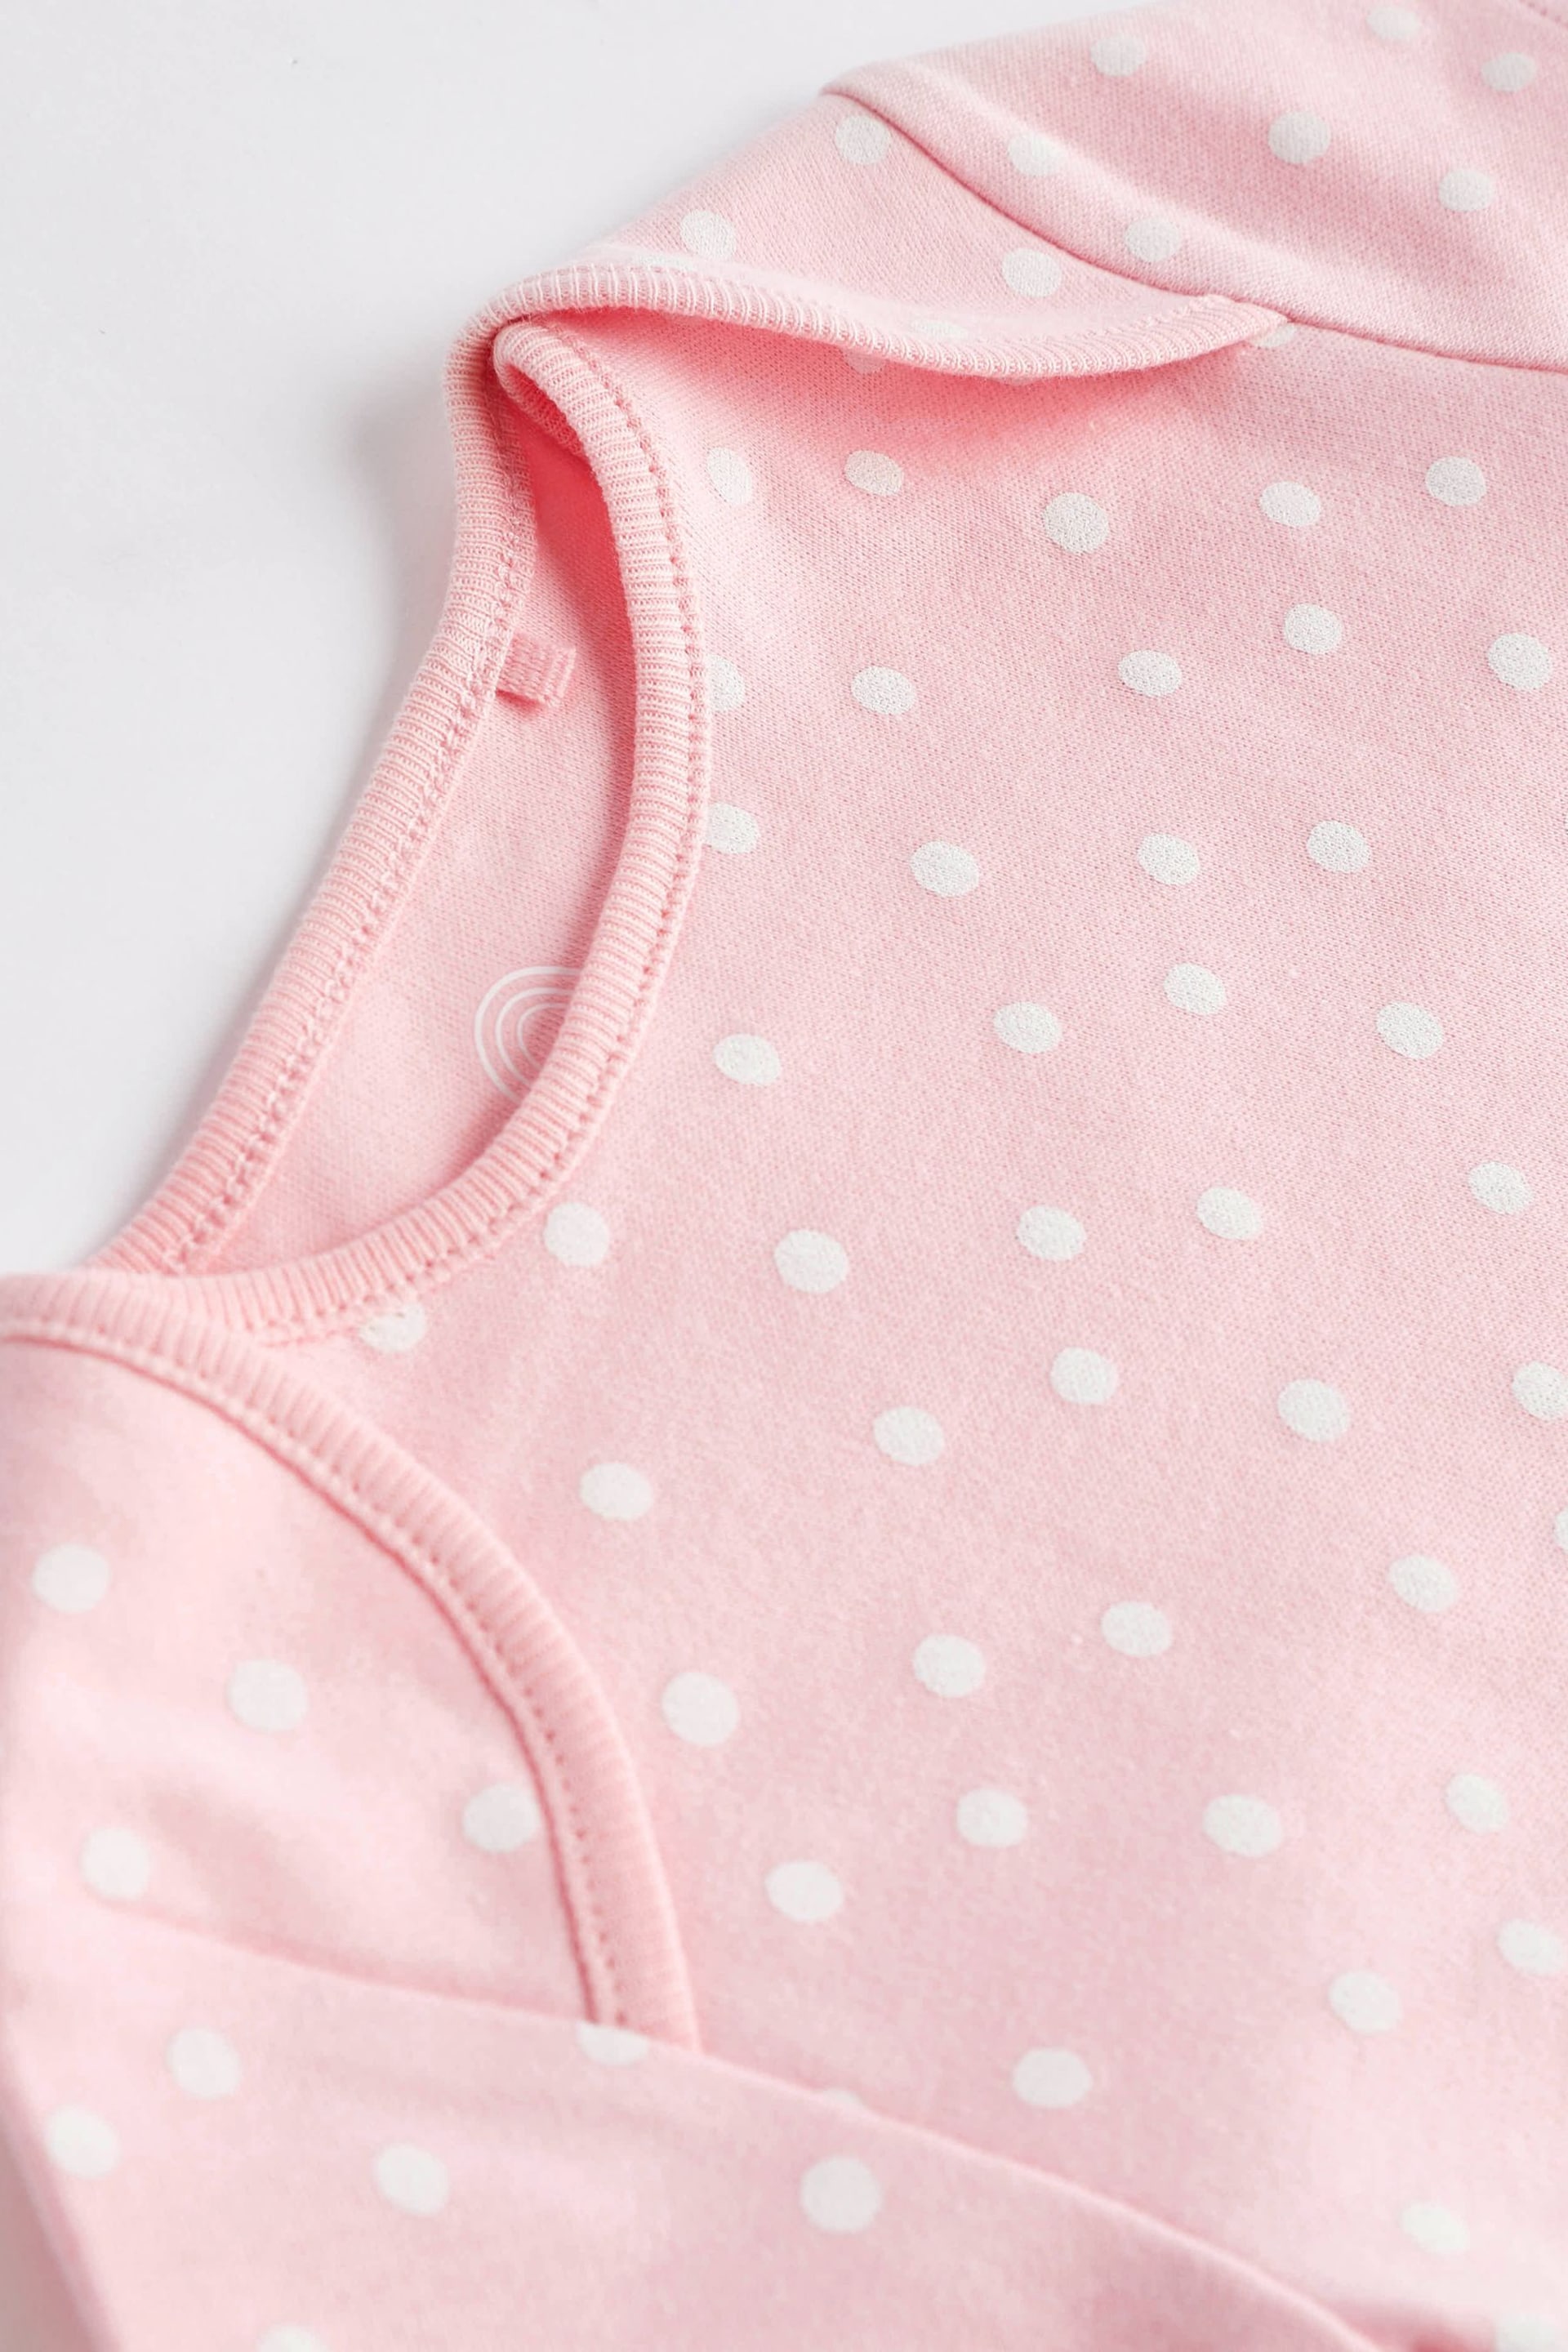 Pink/White Baby Short Sleeve Bodysuits 4 Pack - Image 5 of 6